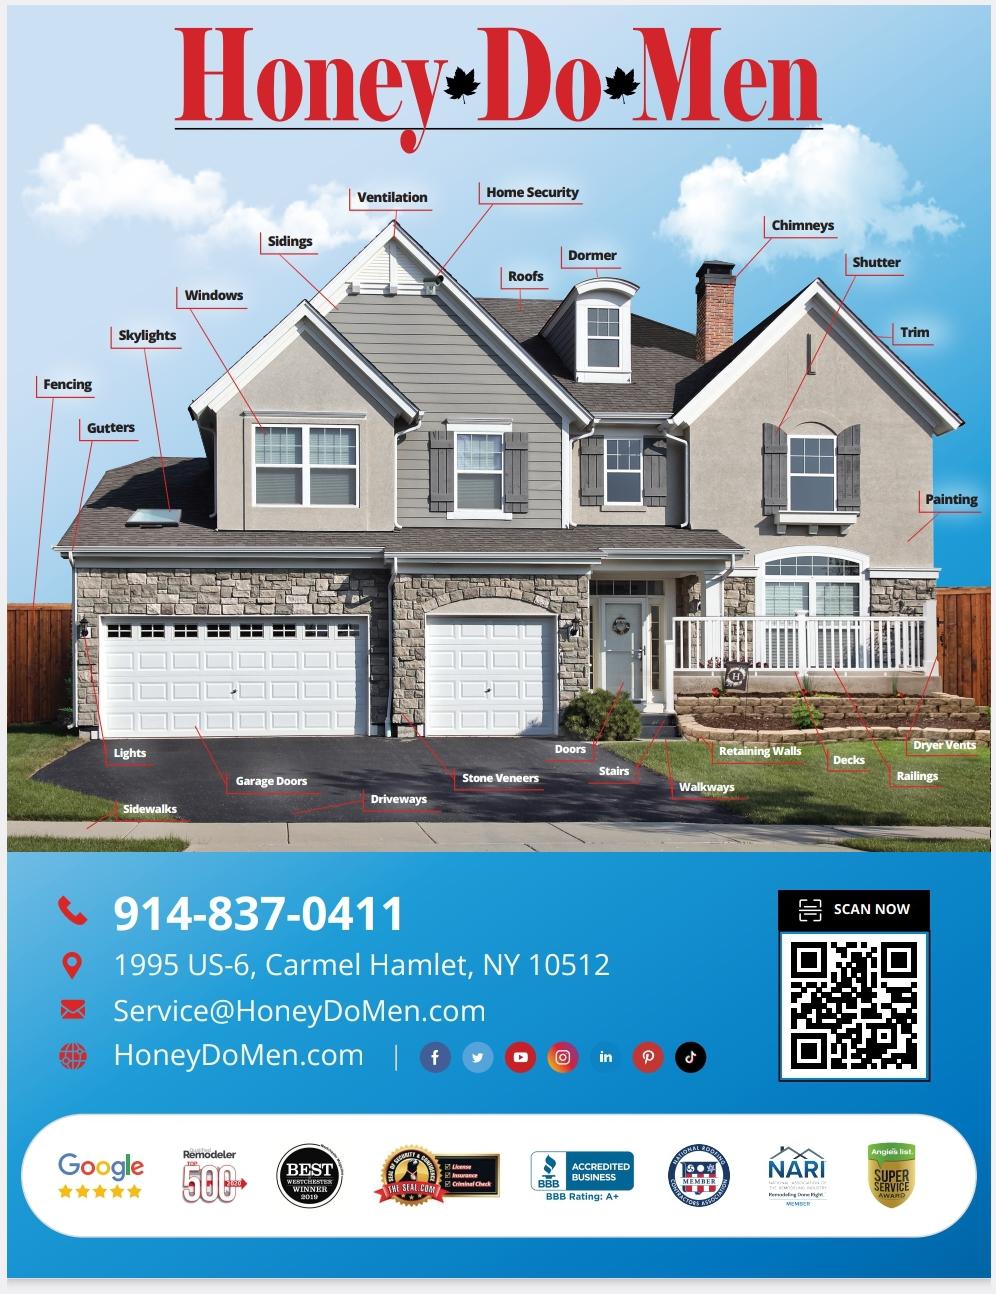 "Home Remodeling in Westchester, Putnam, & Fairfield Counties"